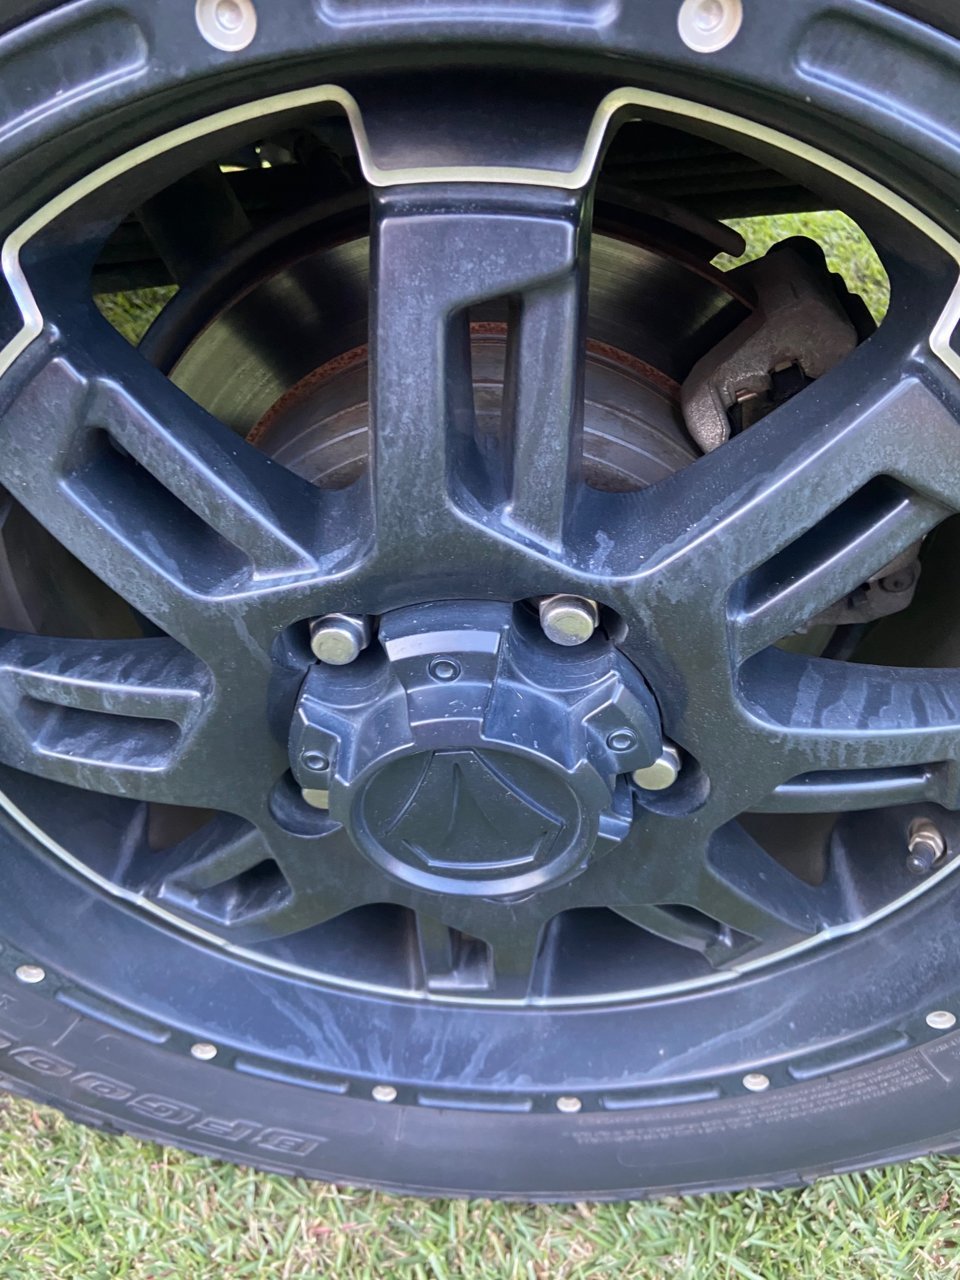 Cleaning black toyota rims